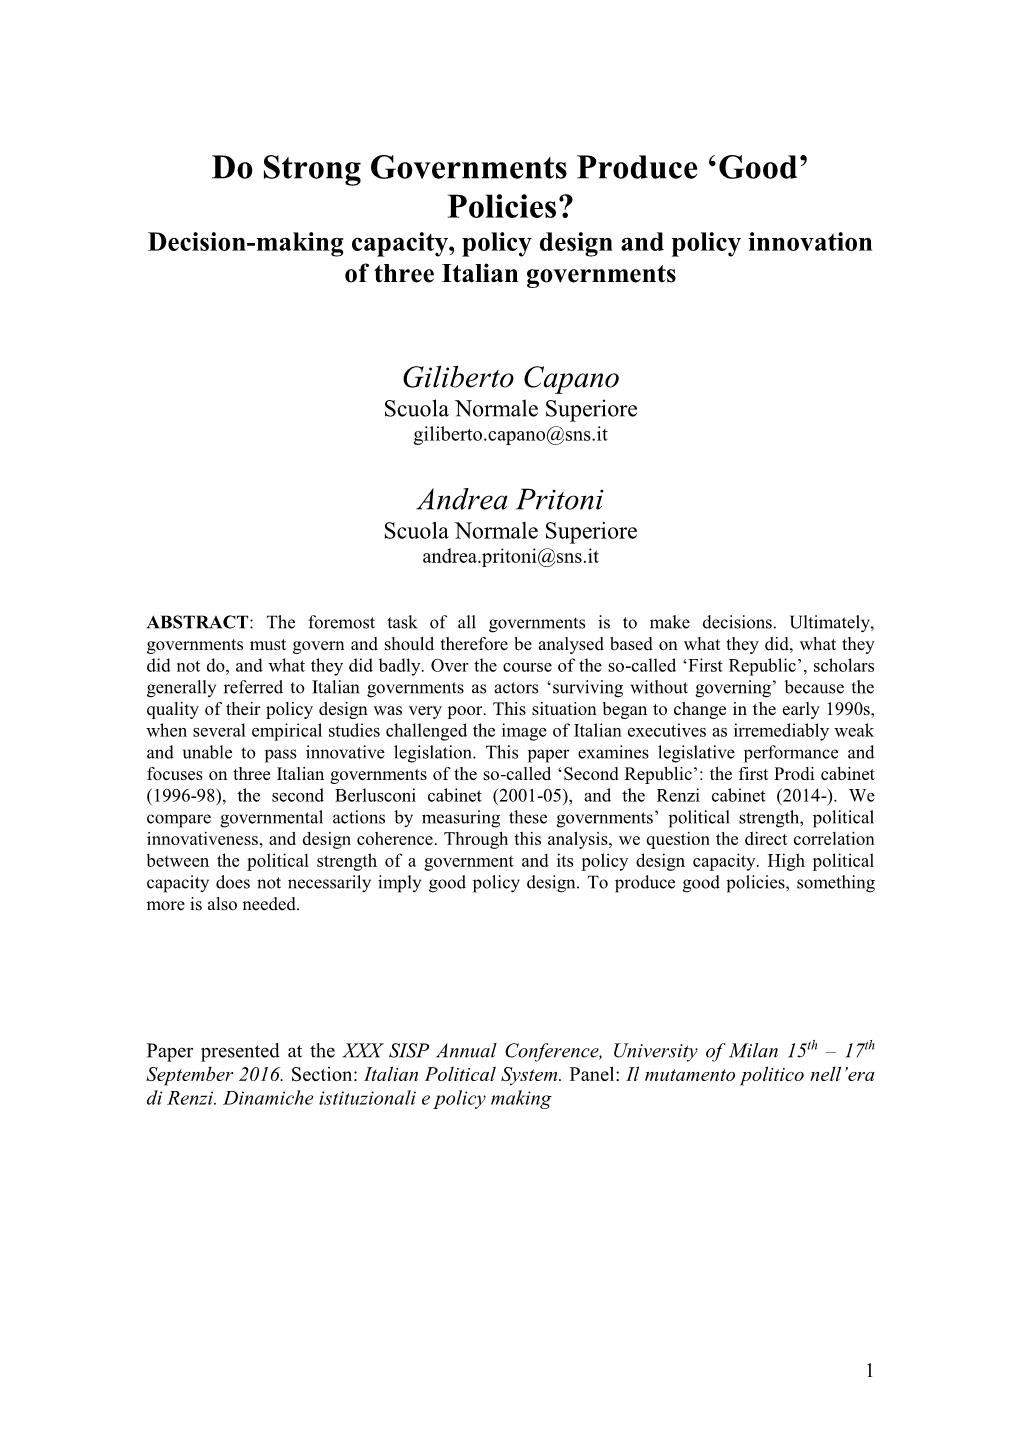 Do Strong Governments Produce ‘Good’ Policies? Decision-Making Capacity, Policy Design and Policy Innovation of Three Italian Governments